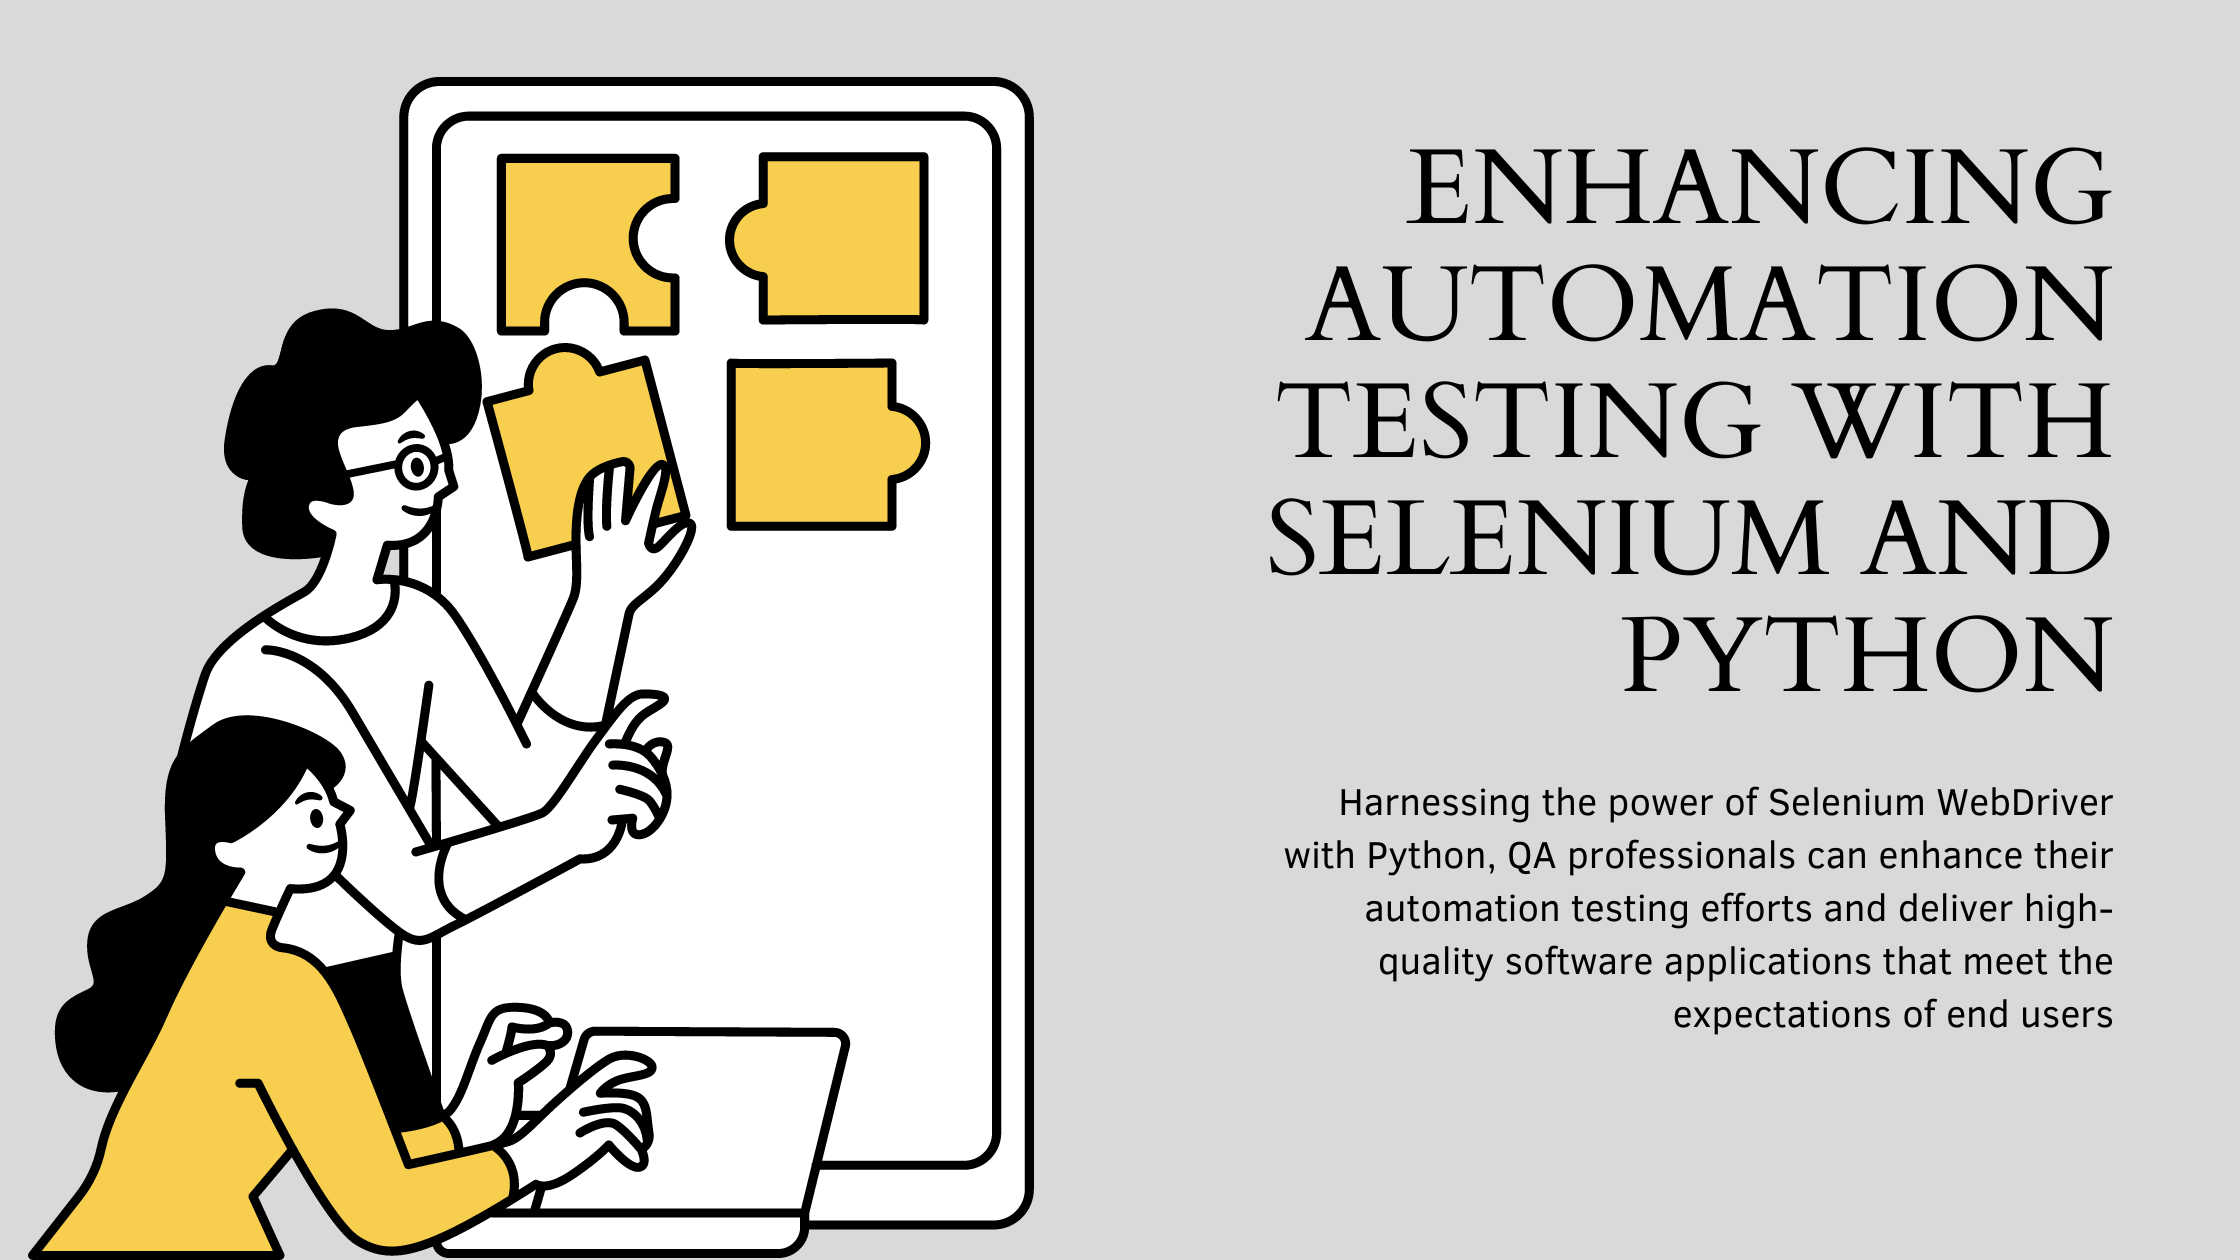 Quality Assurance: Enhancing Automation Testing with Selenium and Python